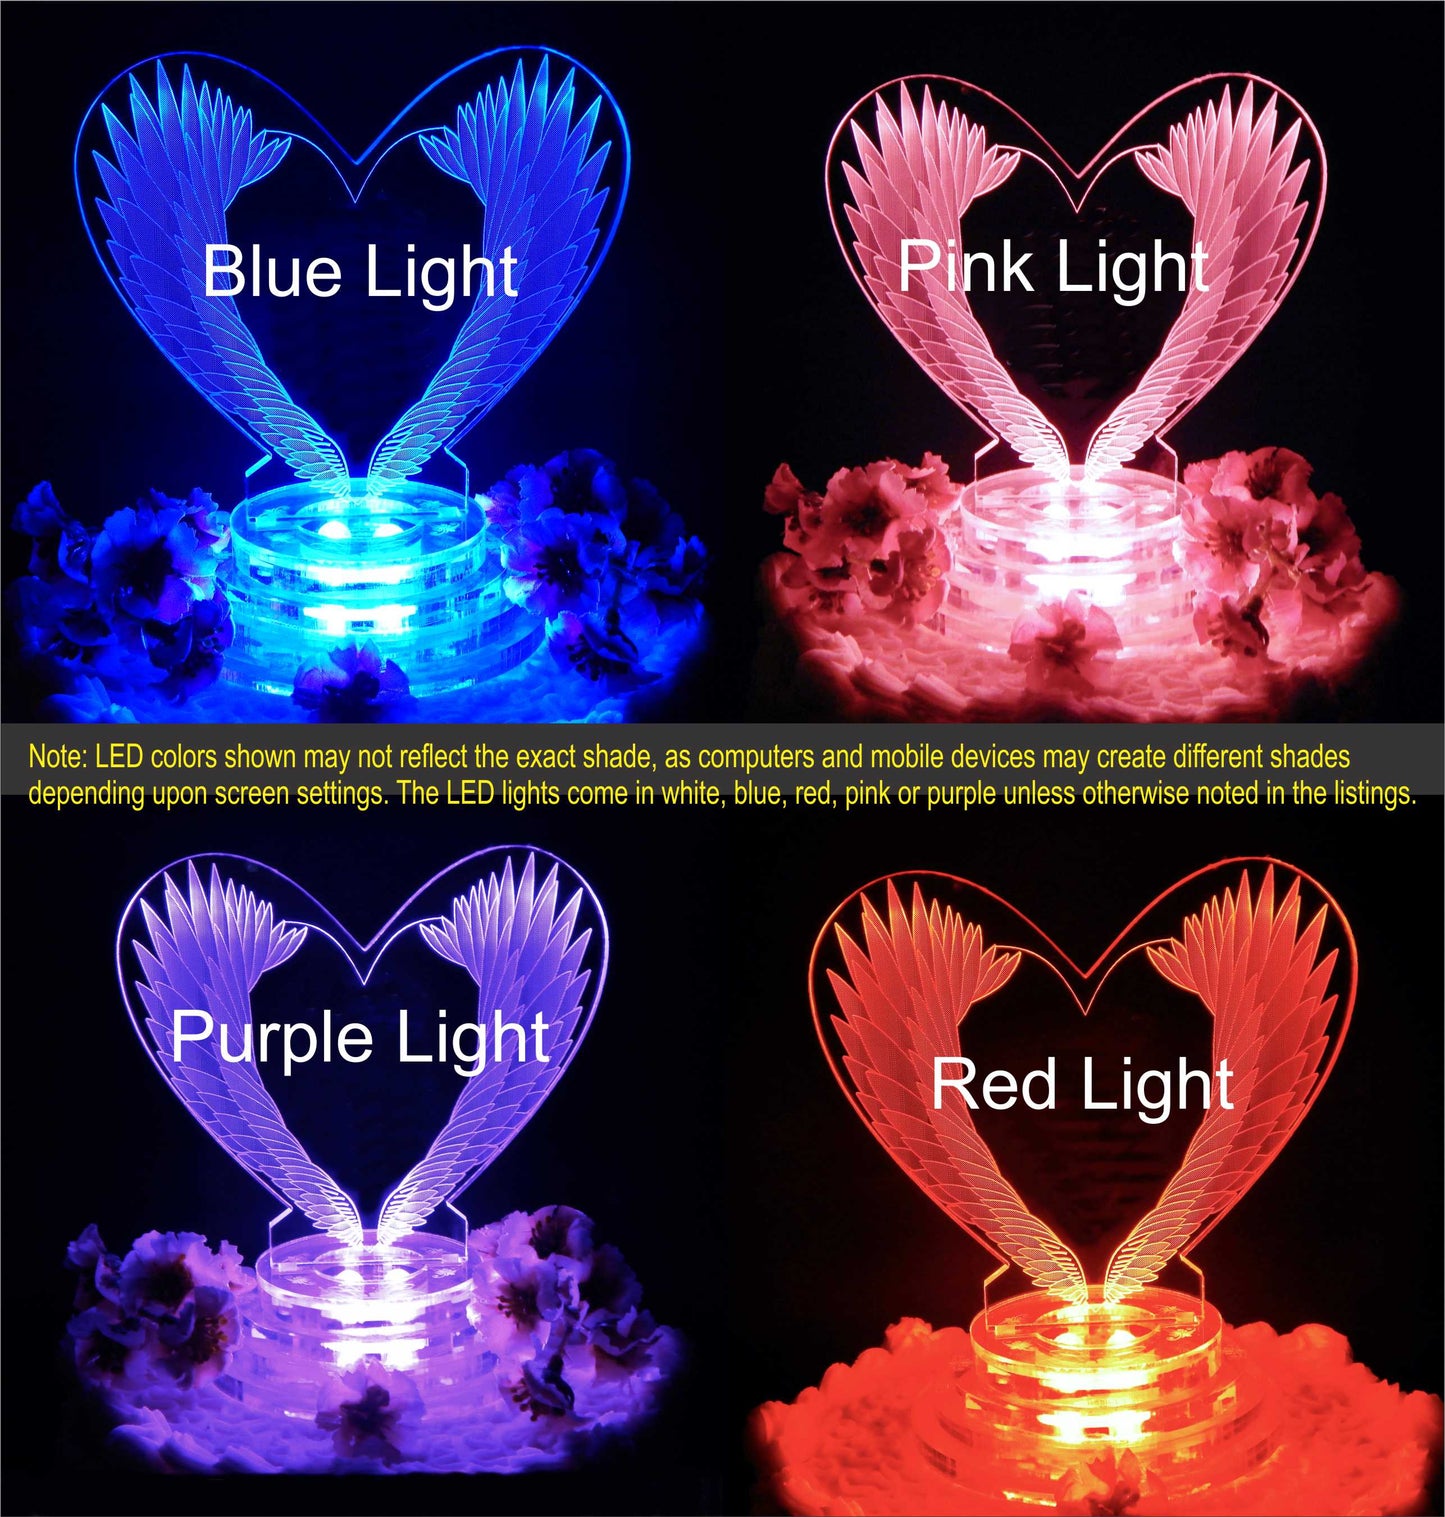 Colored views of acrylic heart shaped cake topper showing pink, purple, blue, and red lighted views